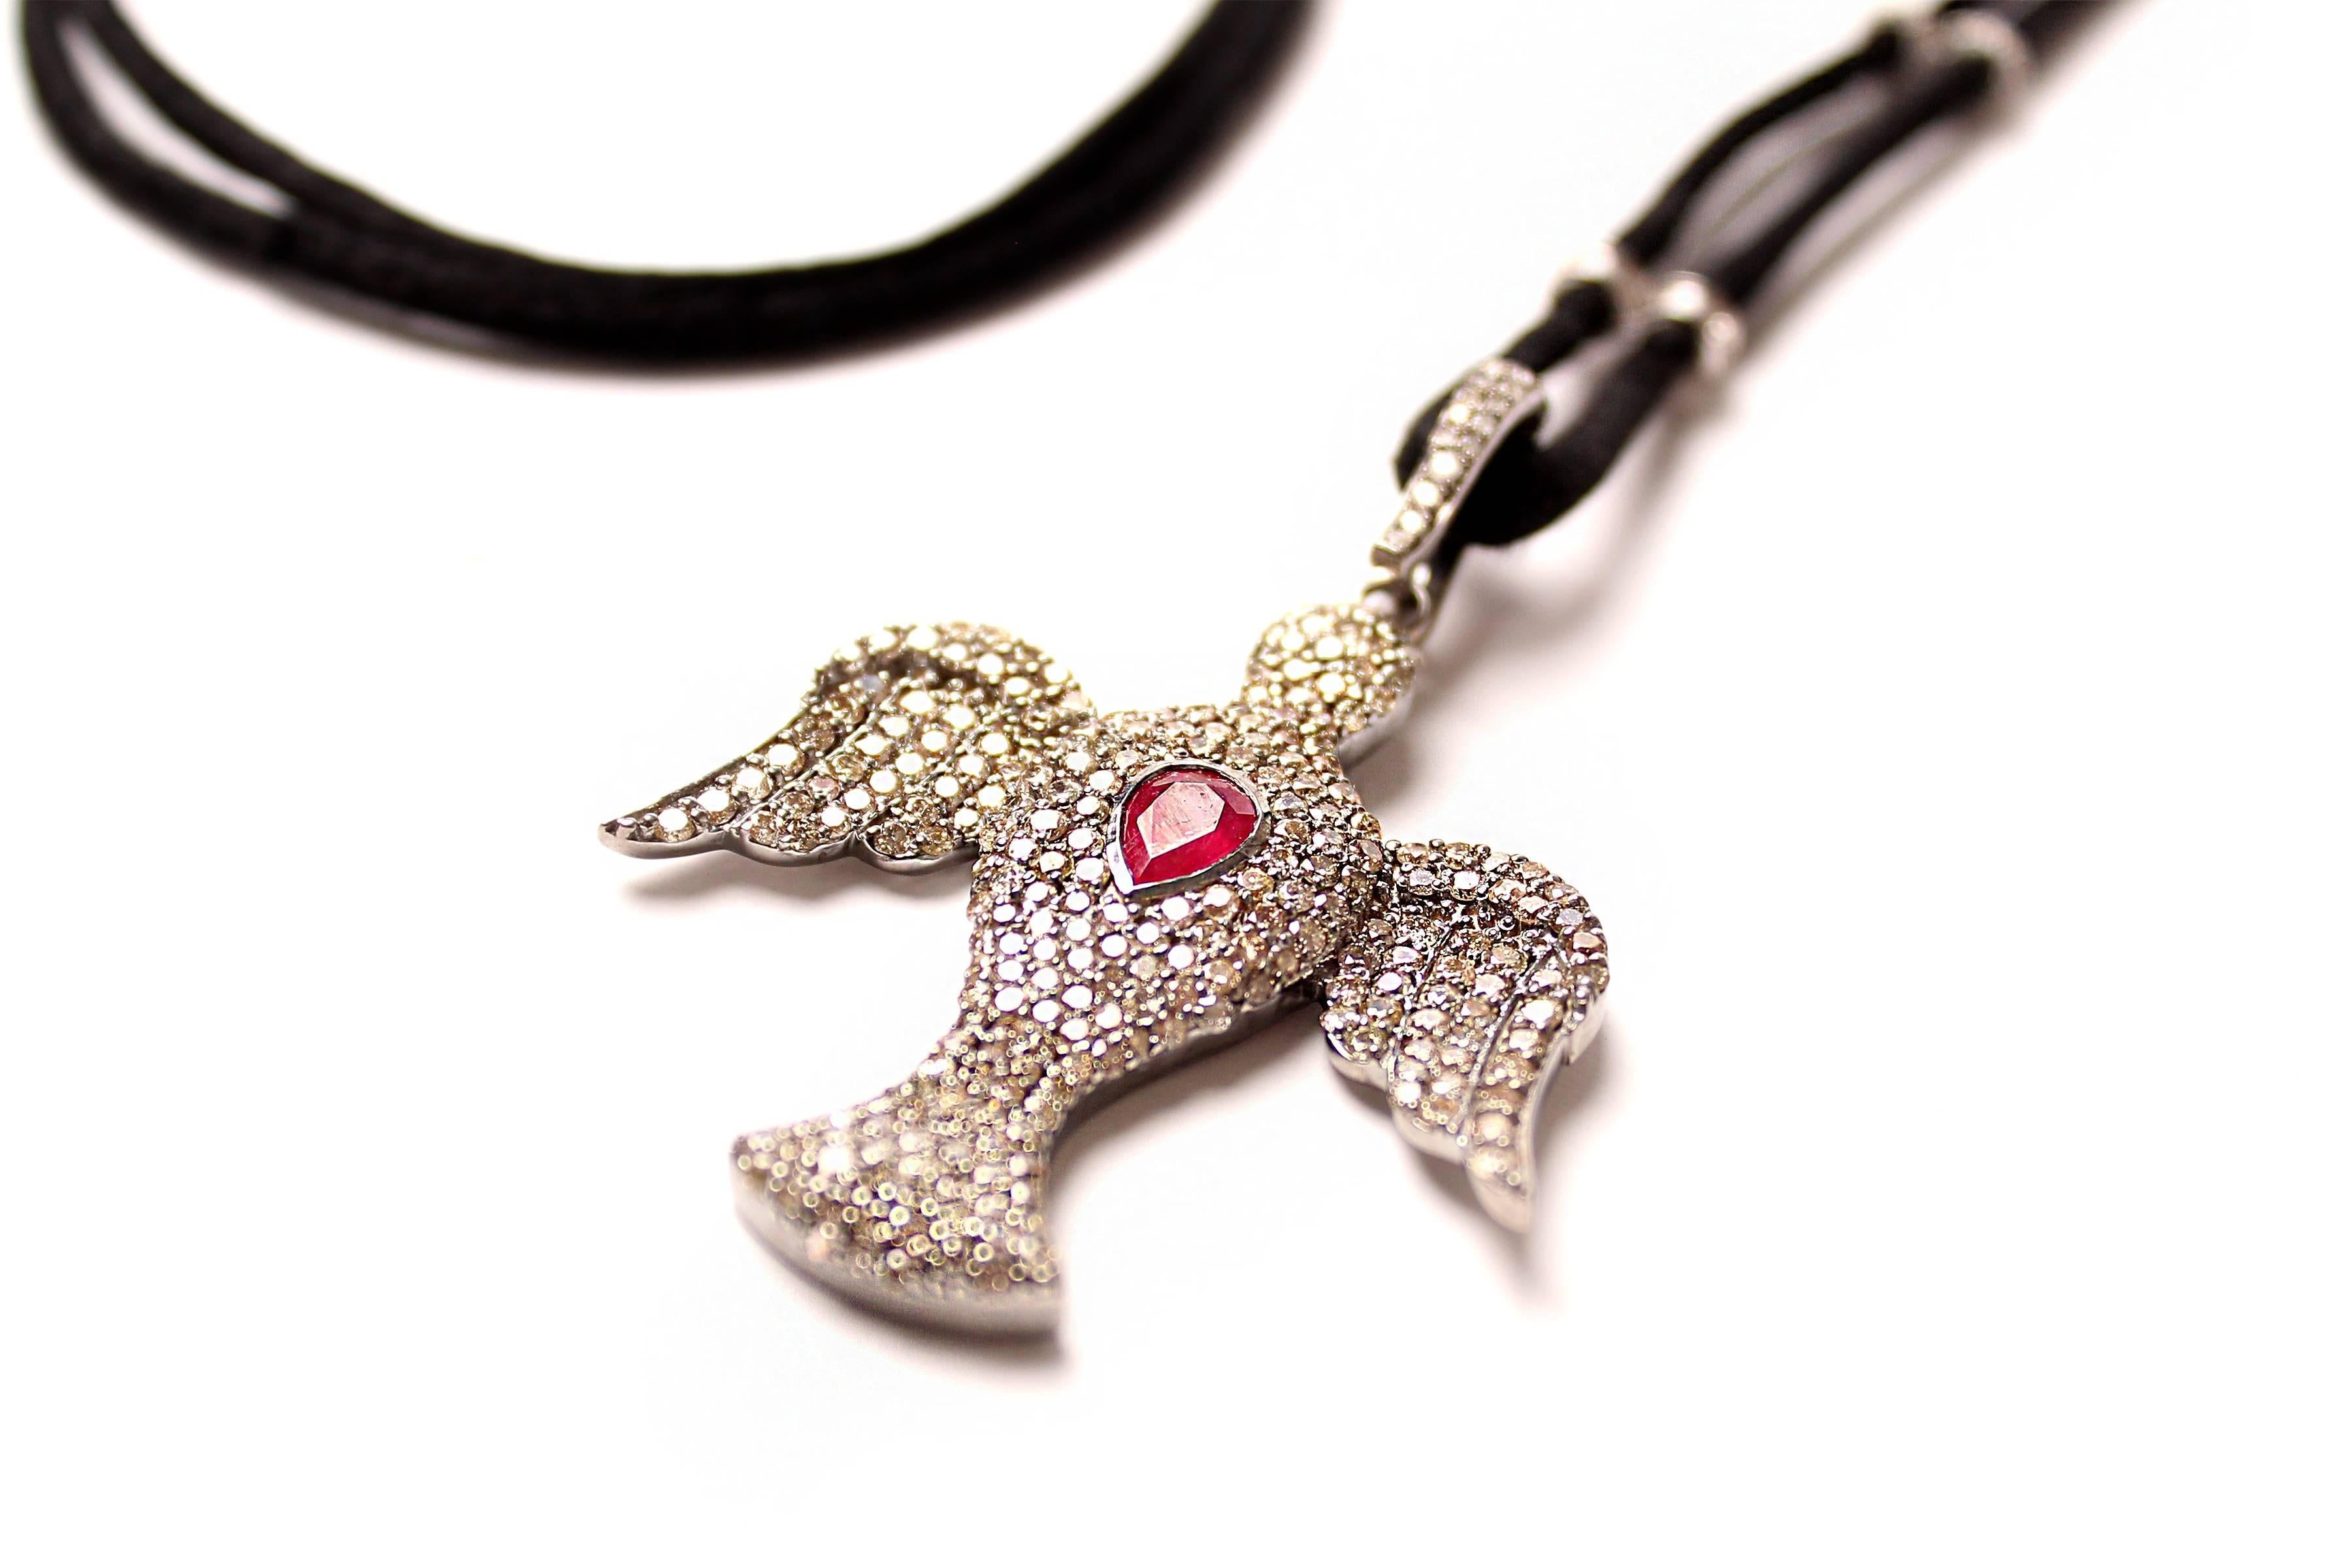 Diamond and ruby pendant with removable diamond and silver clasp. Adjustable suede cord with diamonds on silver rings.